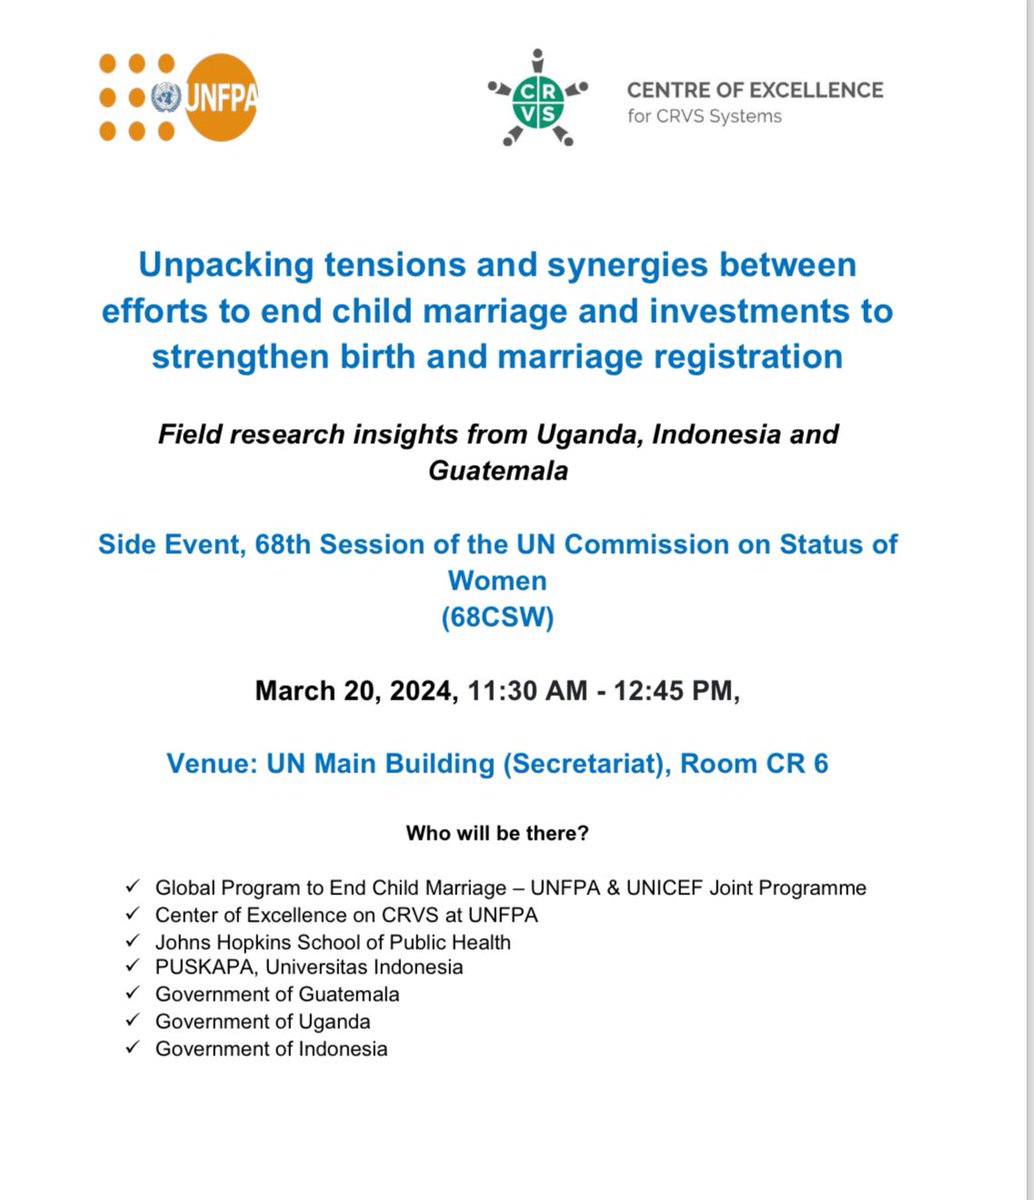 Happening Now! @UNFPA, @UNWomen & the Global Program on Ending Child Marriage is hosting a side event of the #68CSW on unpacking tensions and synergies between efforts to end child marriage and investments to strengthen birth & marriage registration. Join us at @UN with @puskapa